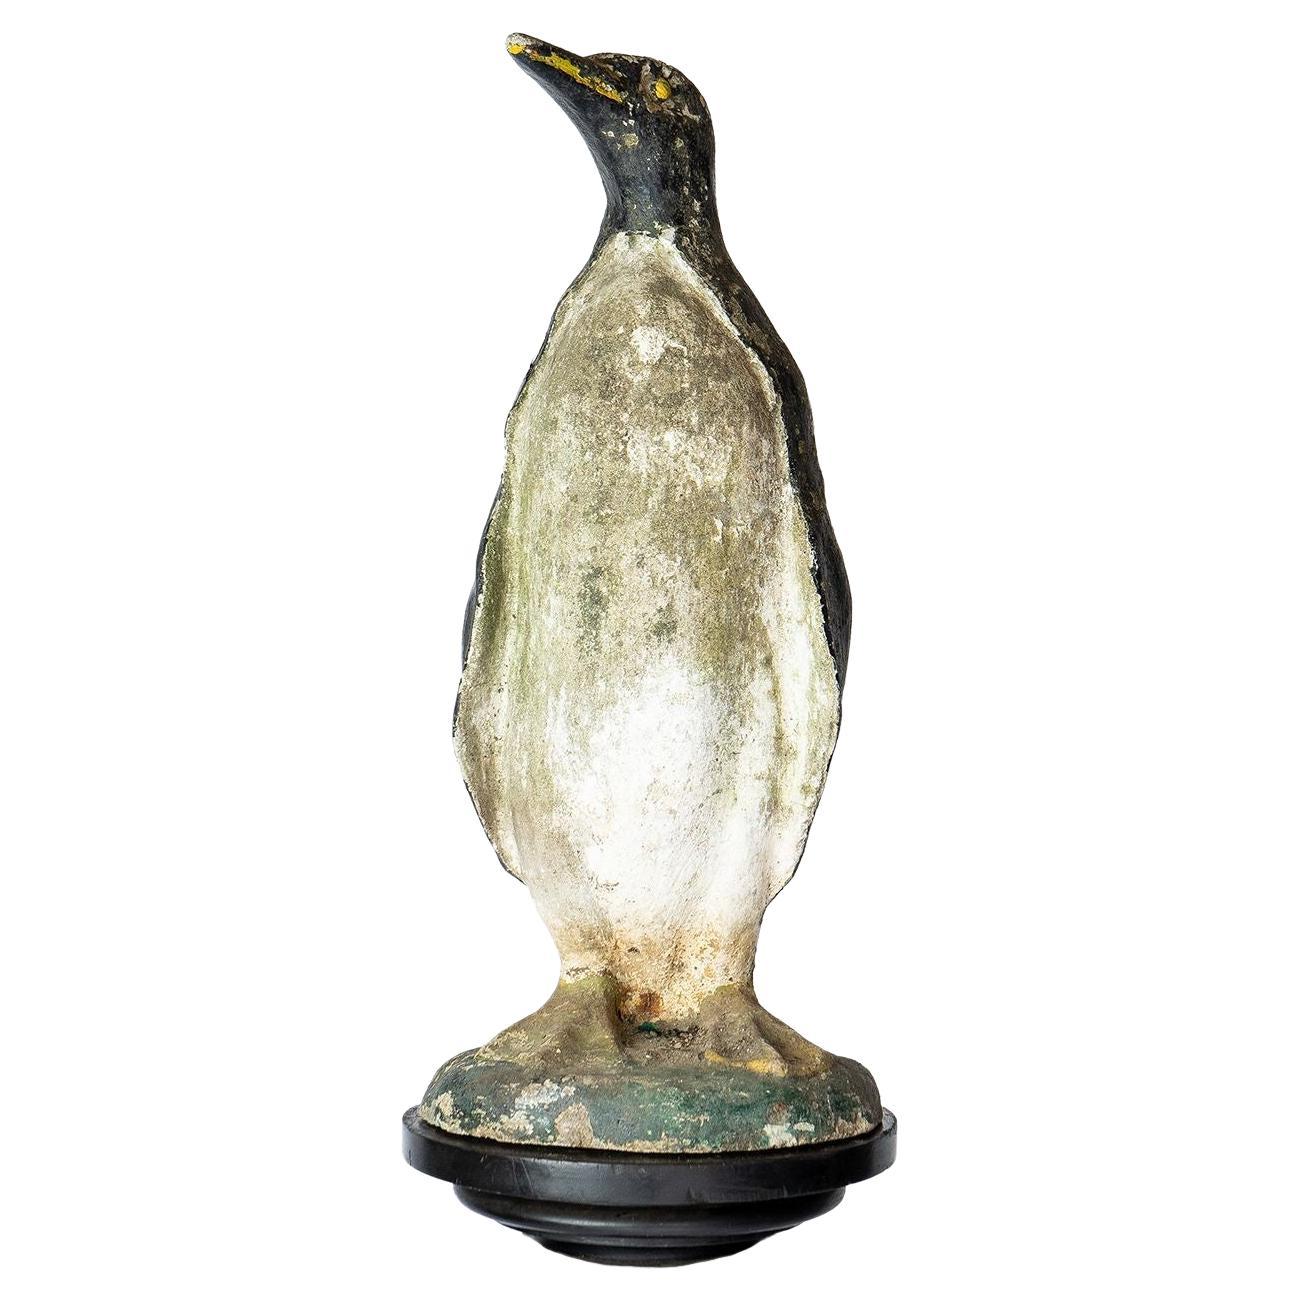 Vintage Cast Outdoor Sculpture With Original Paint

A charming addition to any garden but also looks great in the house.

Originating from France and dating to the early-mid 20th century, somewhere between the 1920s-1950s.

Naturally worn surface